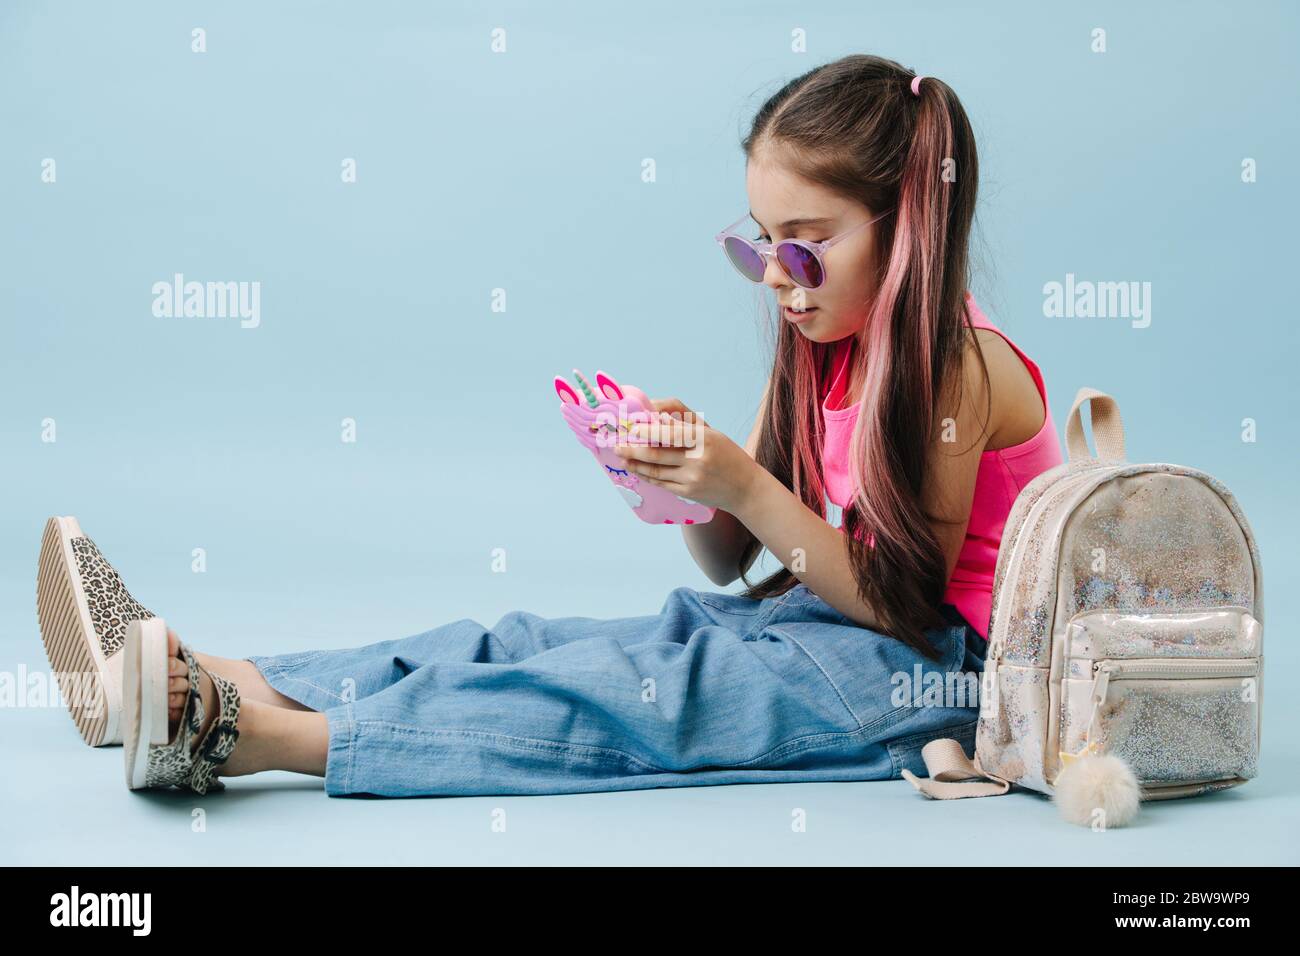 Happy little girl in a pink shirt sitting on the floor, browsing in her phone Stock Photo